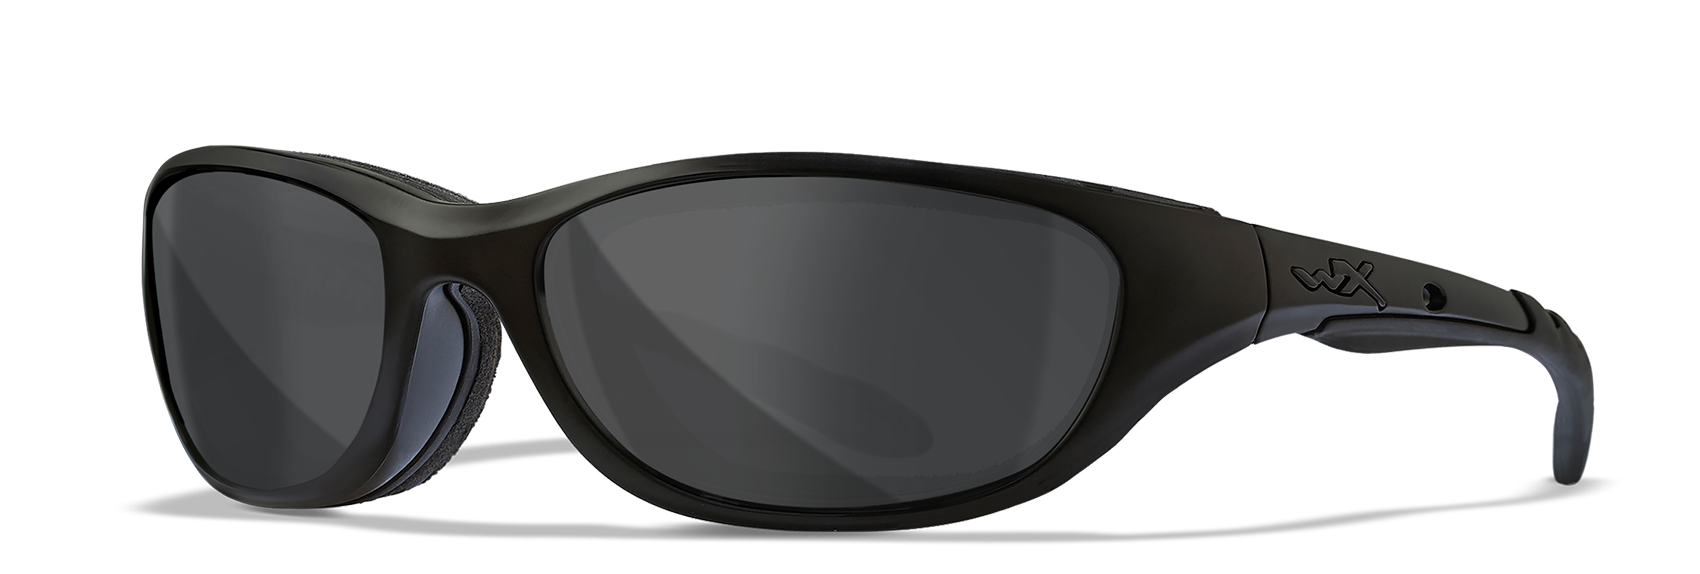 Wiley X Airrage Smoke Gray Lens Polycarbonate Sunglasses